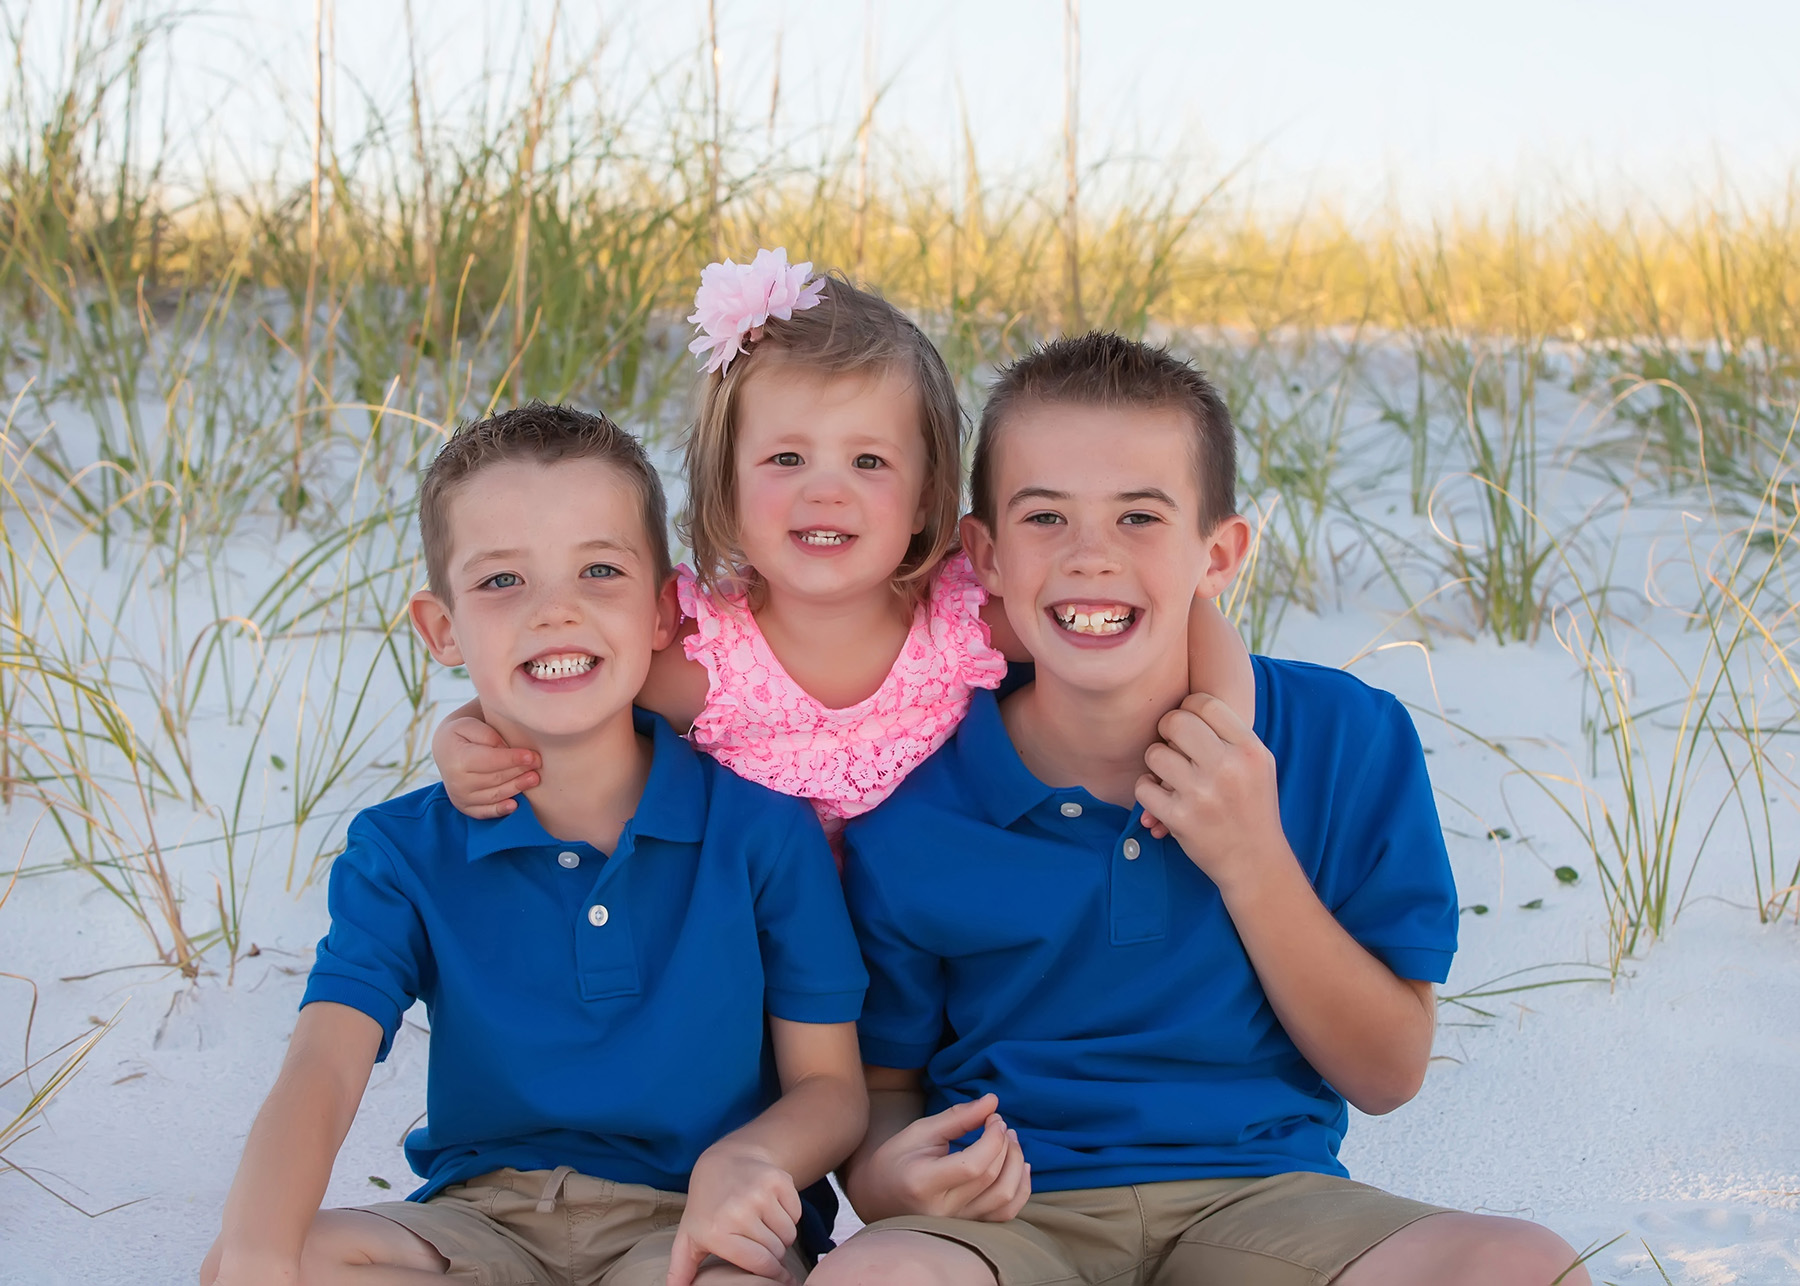 Destin Photography by Tiffany Sims Photography #destin #destinphotography #destinbeachphotography #30aphotography #30abeachphotography #destinphotographer #30aphotographer #fortwaltonbeachphotography #okaloosaislandphotography | Destin Photography Okaloosa Island, Ratliff Family